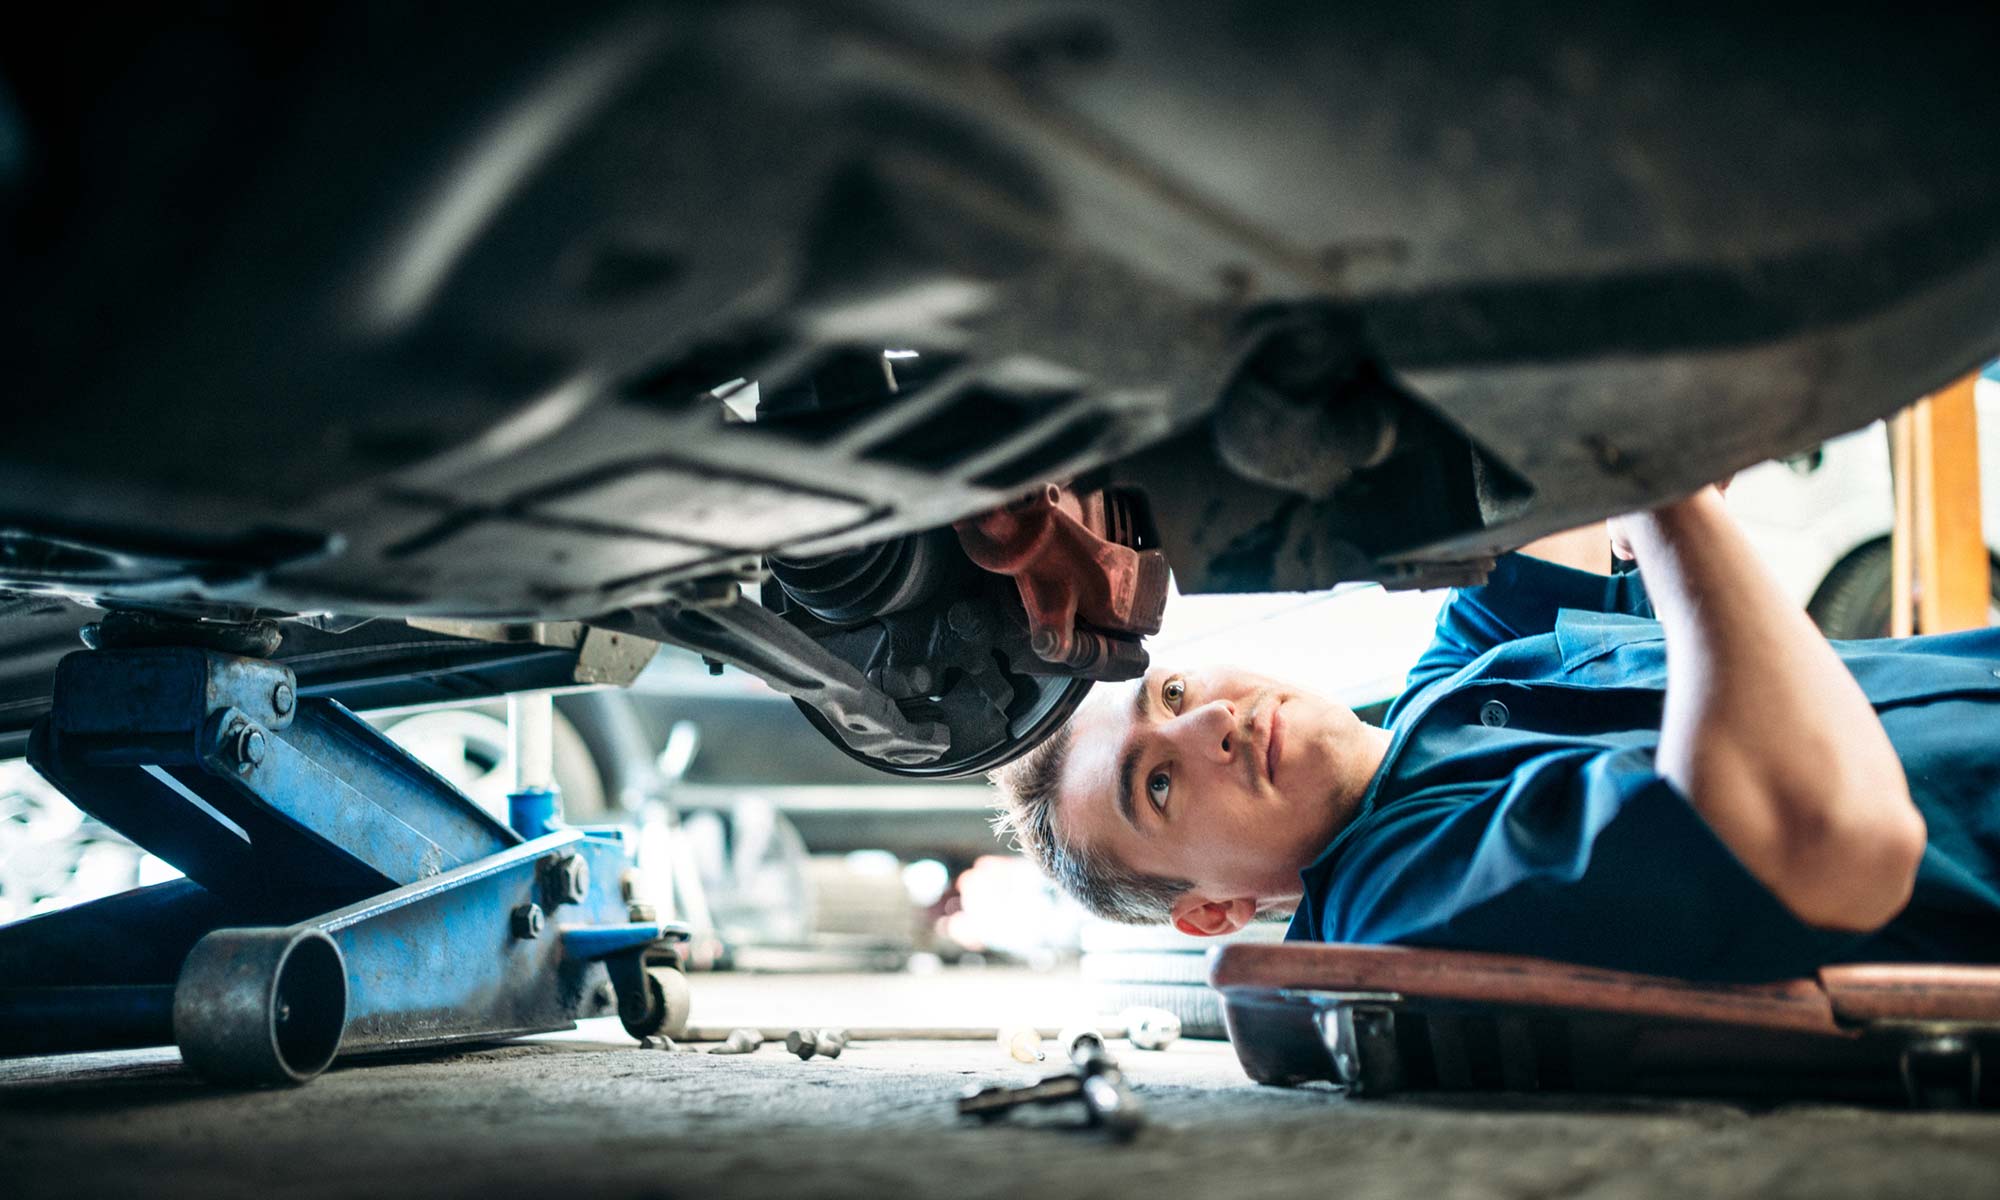 A mechanic checking the undercarriage of a vehicle.